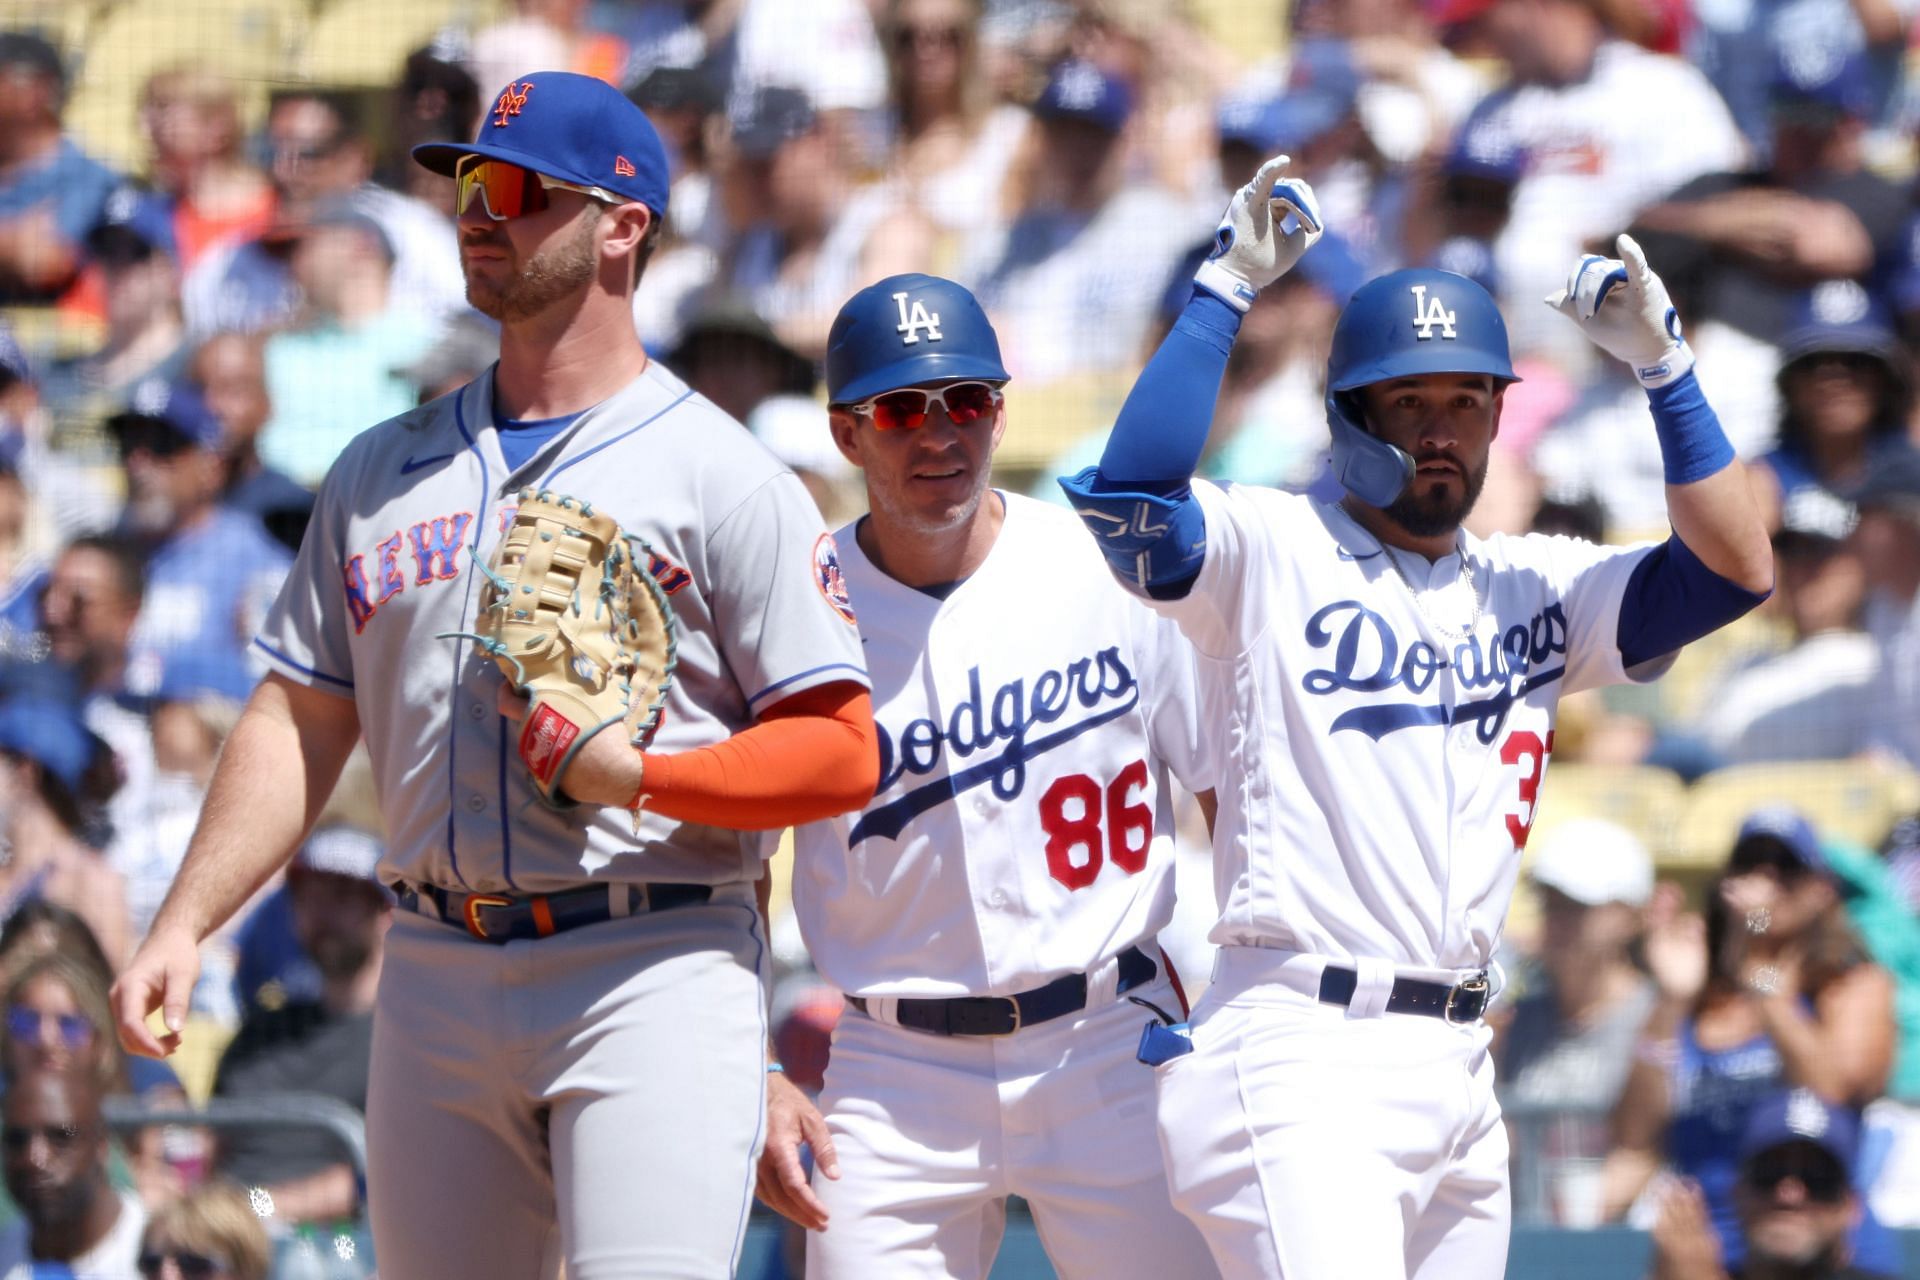 Are the New York Mets or the Los Angeles Dodgers the favorite?